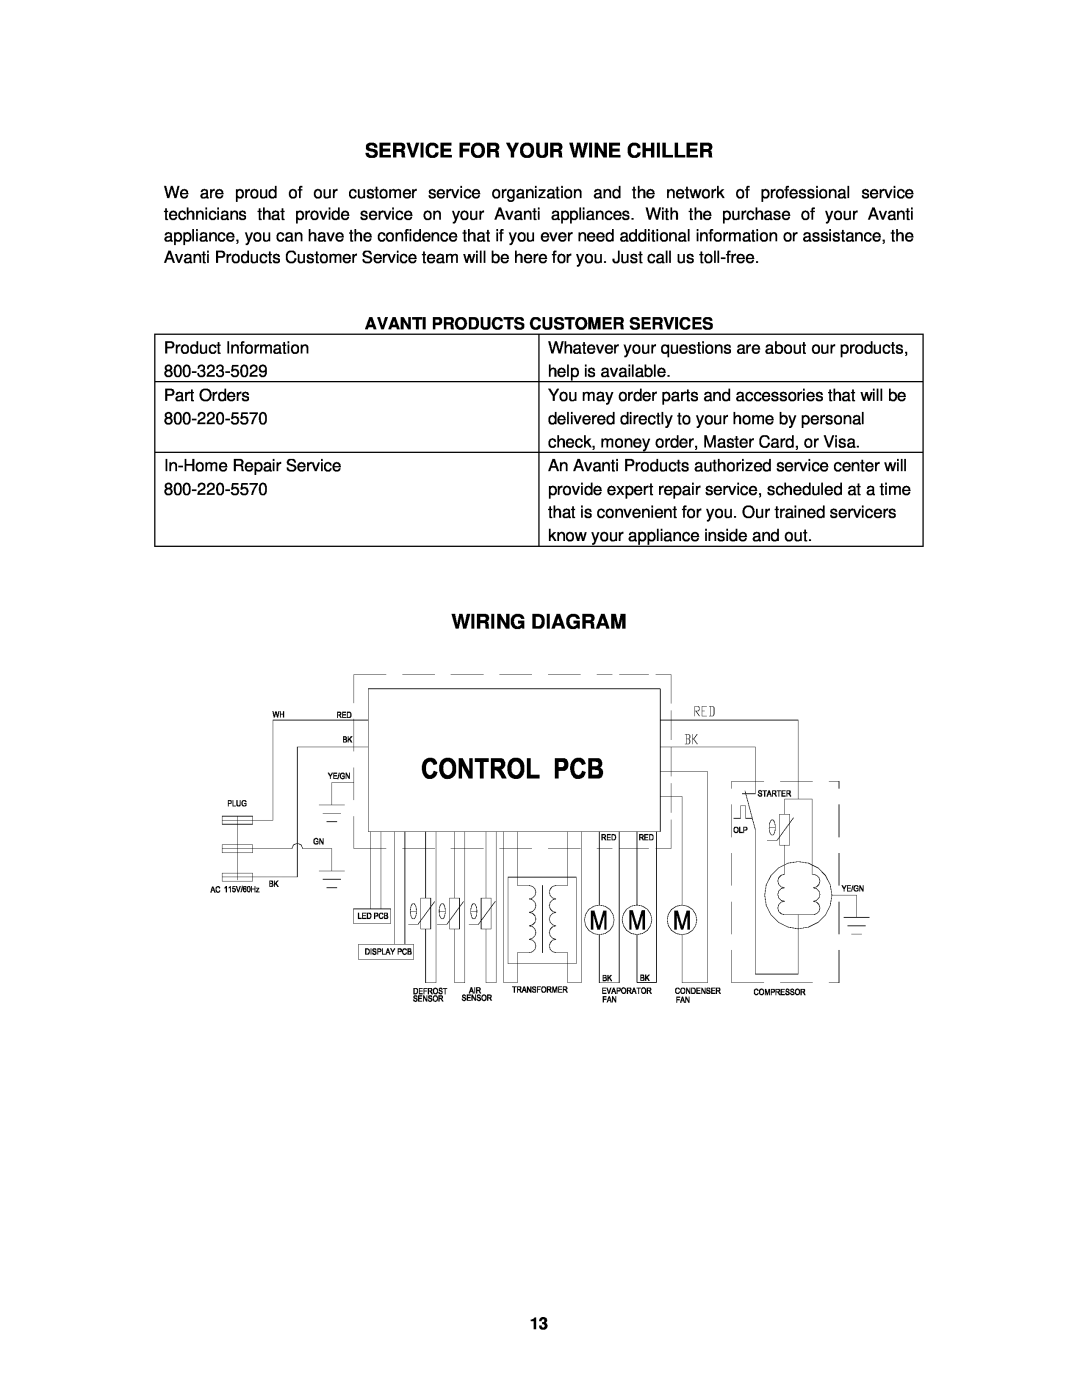 Avanti WCR684C instruction manual Service For Your Wine Chiller, Wiring Diagram, Avanti Products Customer Services 